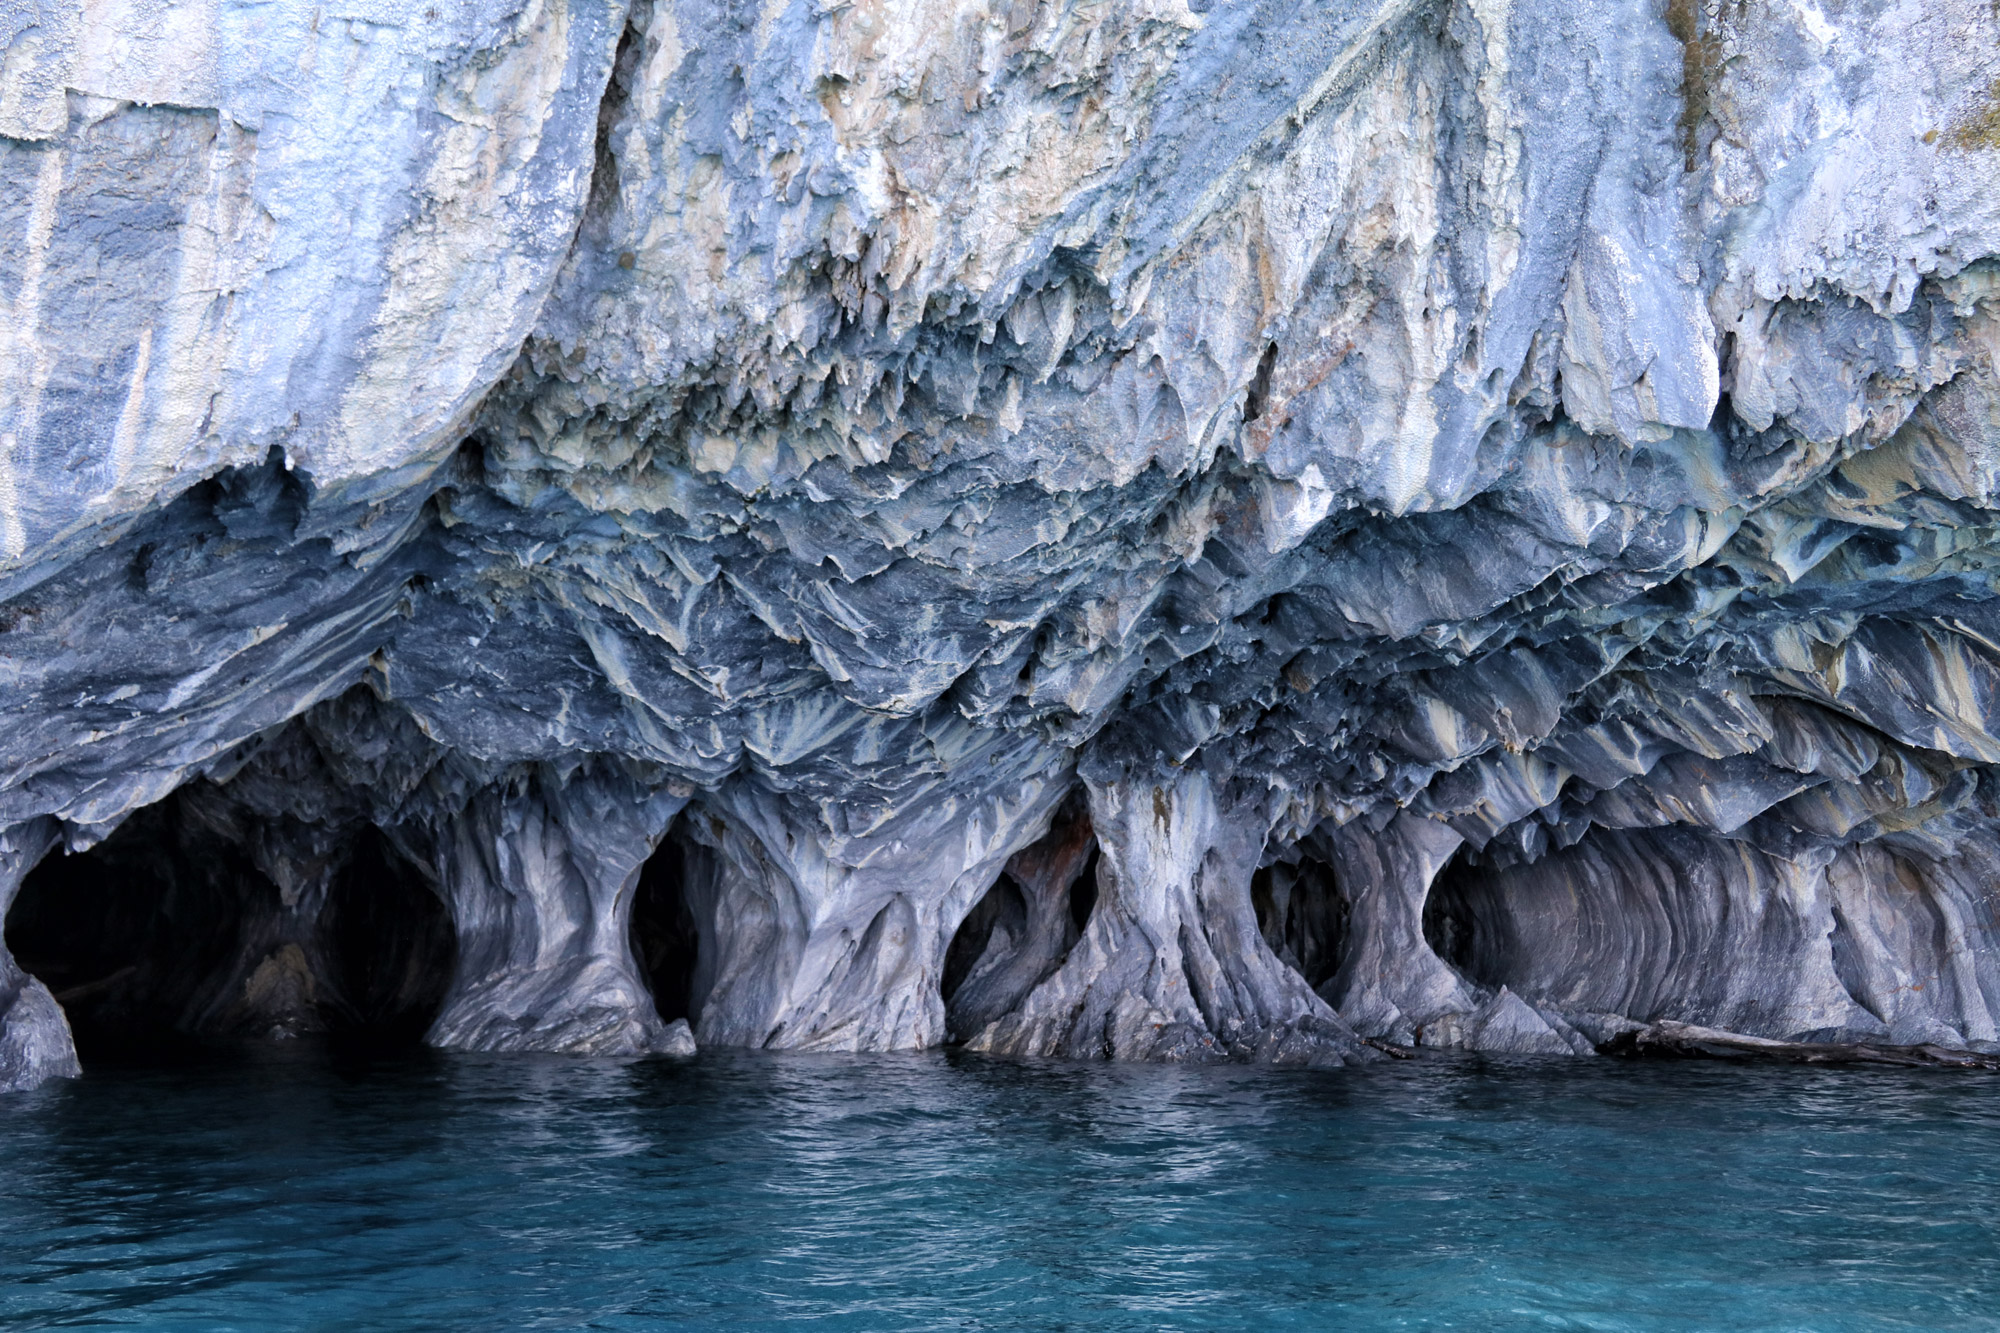 Marble Caves in Patagonië - Chili